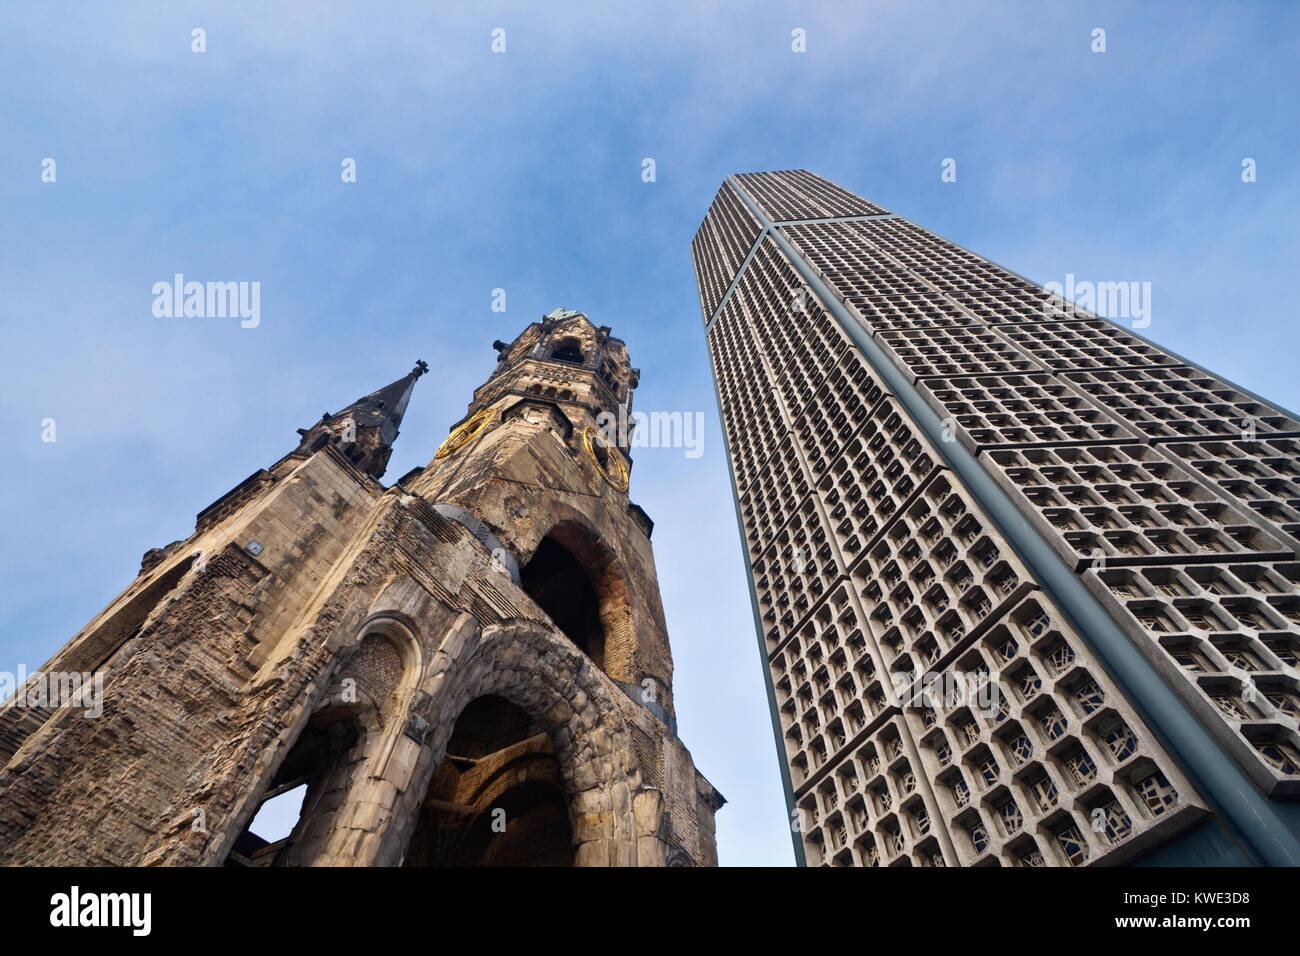 Wide angle view of the Kaiser Wilhelm Memorial Church in Berlin with blue sky. Stock Photo